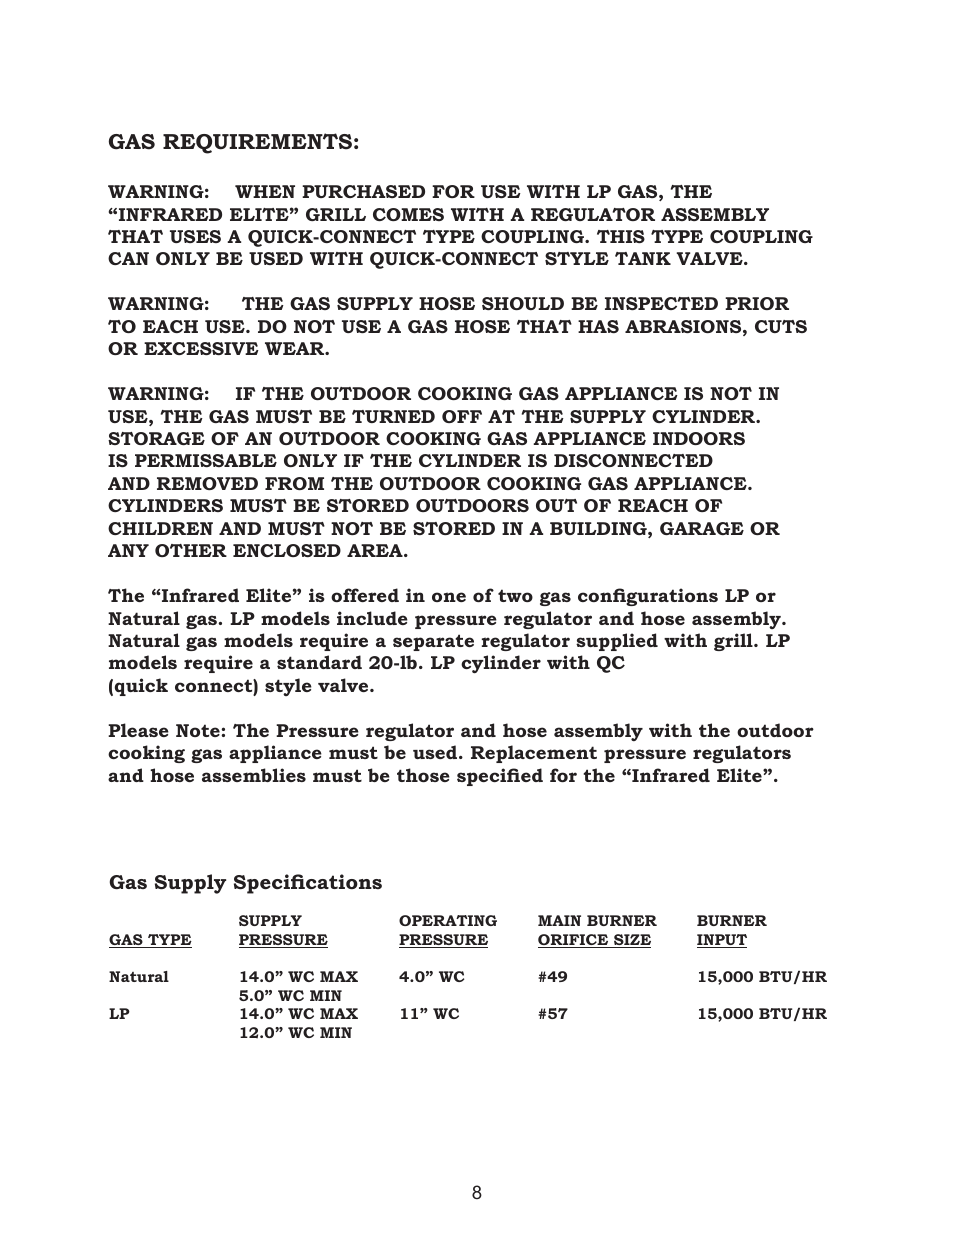 Gas requirements | Golden Blount Infrared Elite User Manual | Page 8 / 19